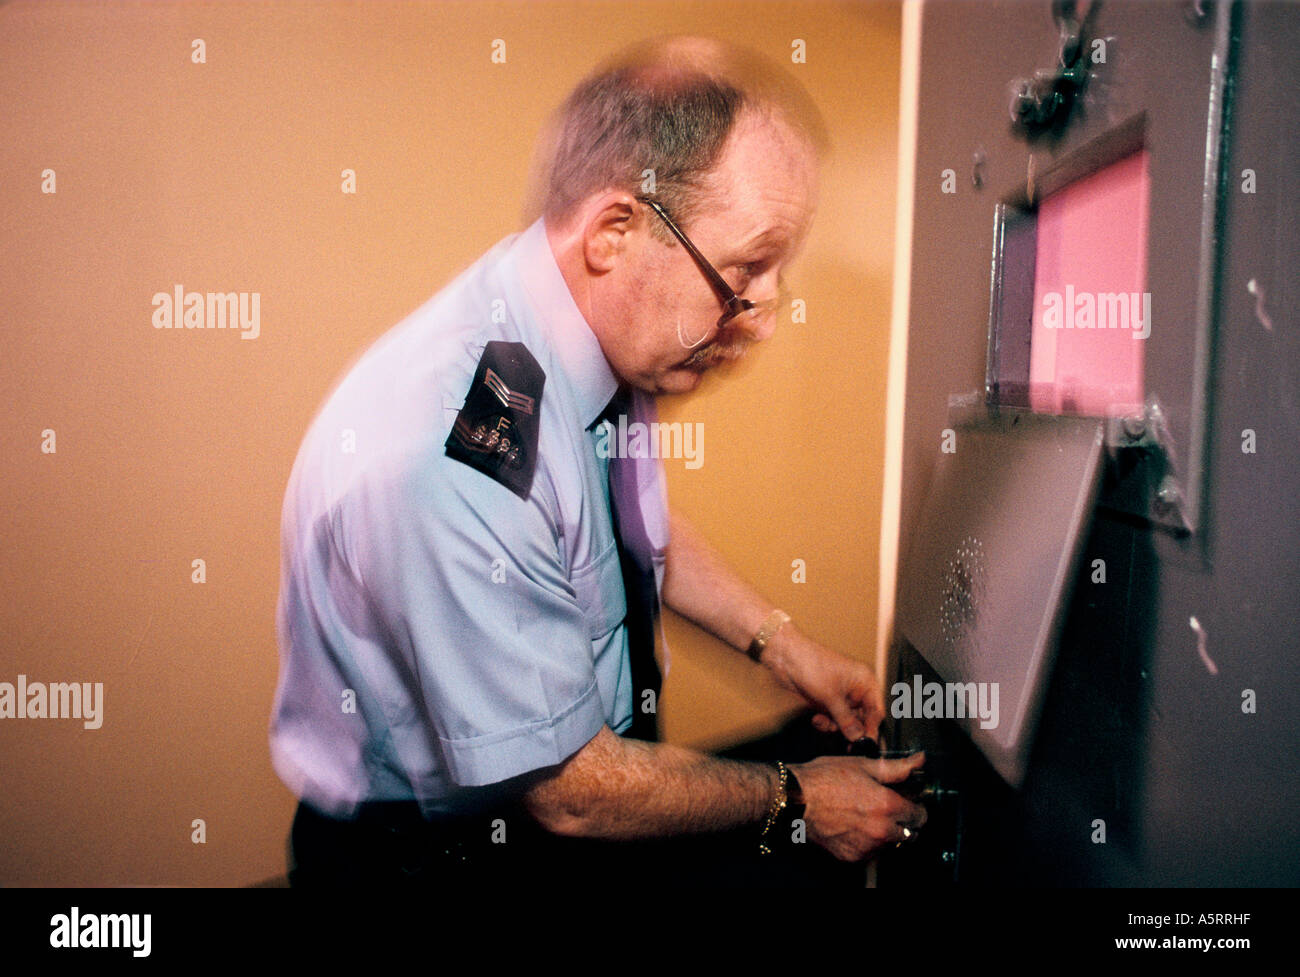 DUTY SERGEANT TALKING TO PRISONER IN POLICE STATION CELL GREATER MANCHESTER POLICE SALFORD Stock Photo